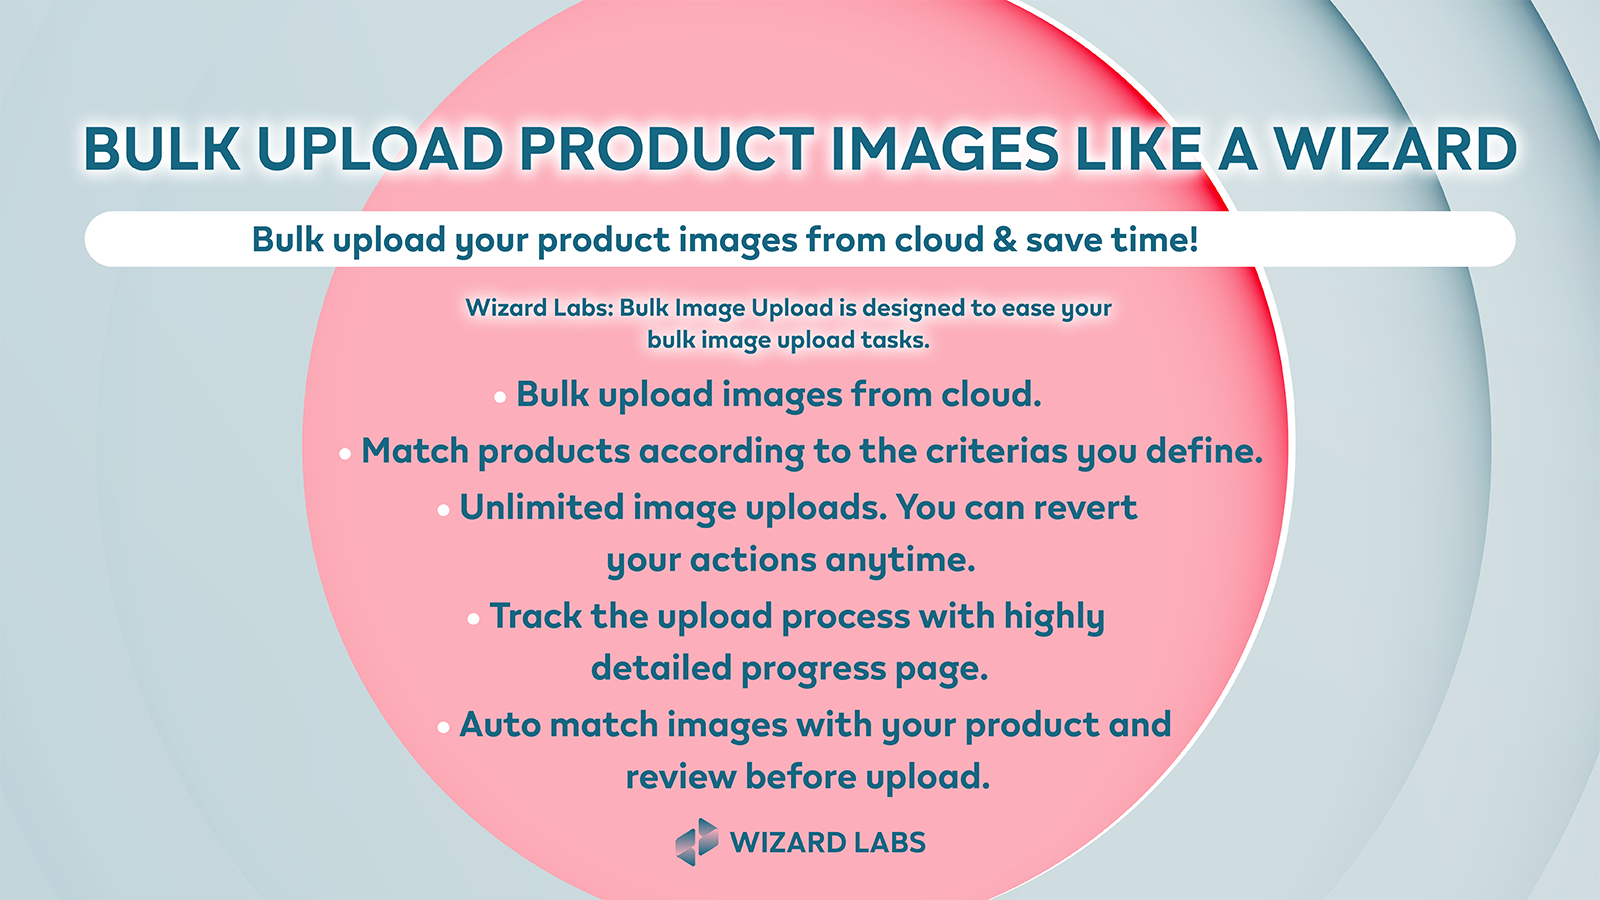 Bulk upload product images to your Shopify store.